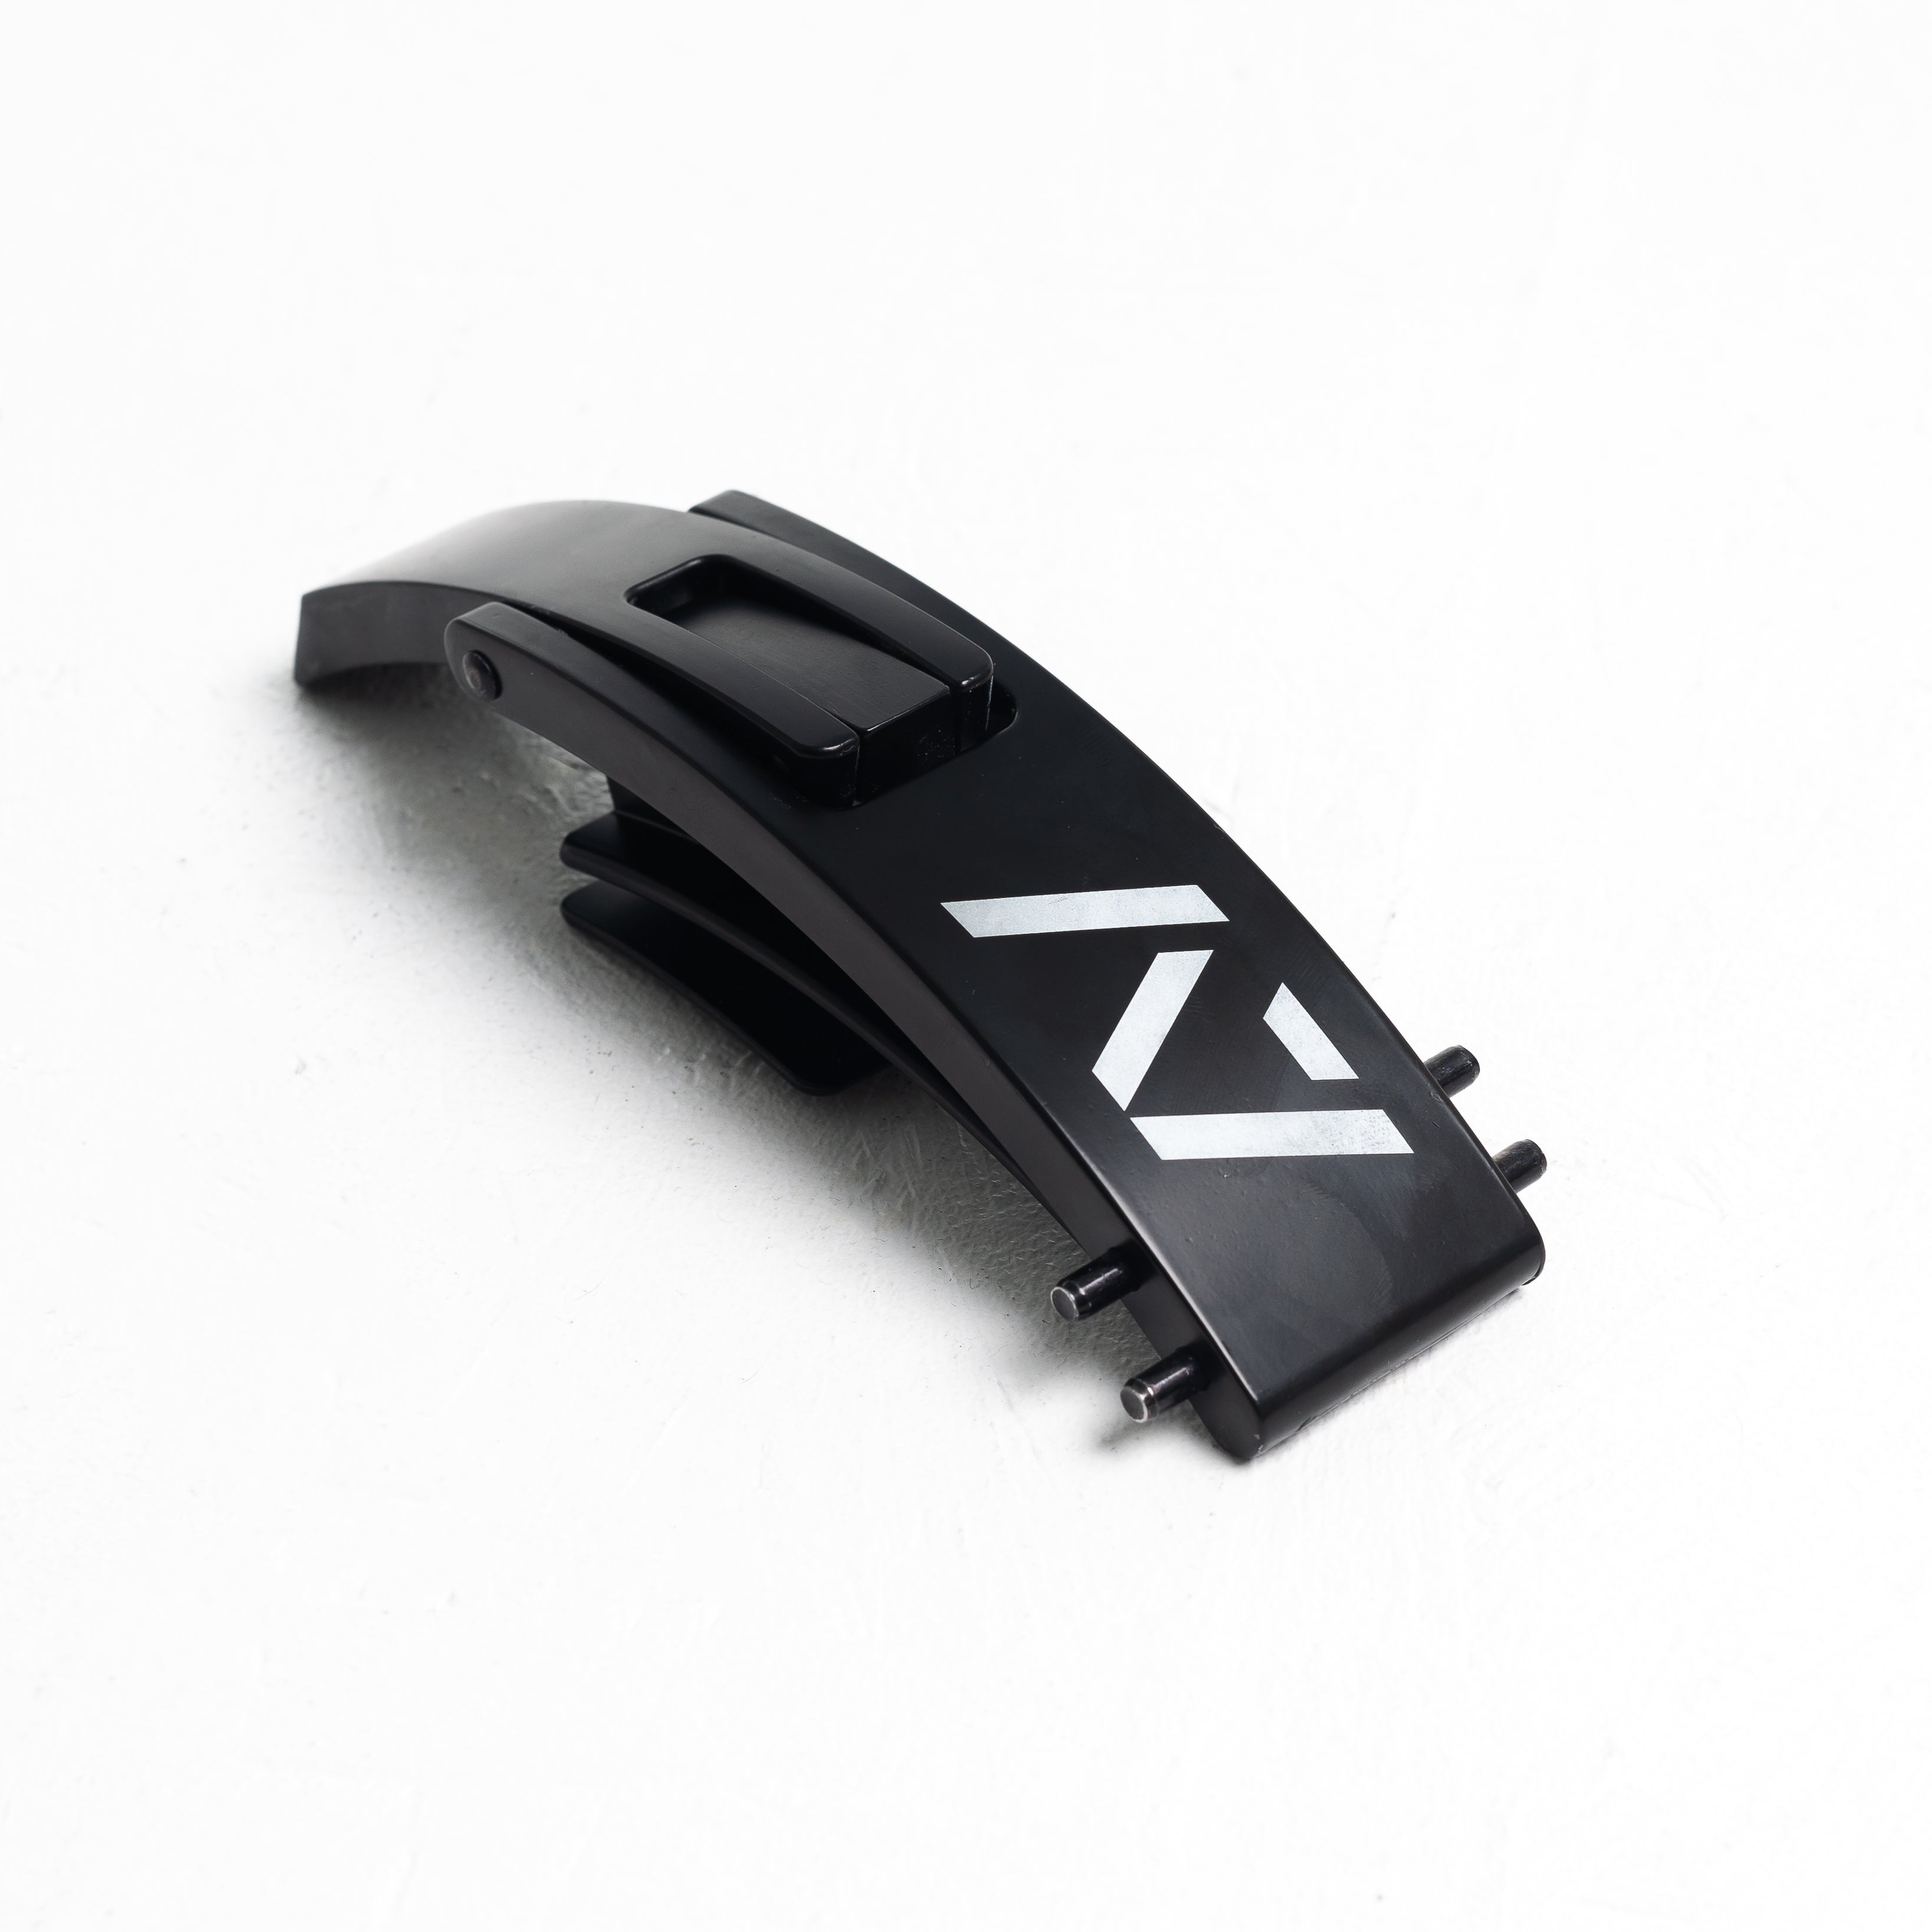 A7 IPF Approved Lever Belt features a black design with black leather, black engraved buckle and debossed A7 logo on the leather. The new Pioneer Adjustable Lever, PAL, buckle allows you to quickly adjust the tightness of your belt for a perfect fit. The IPF Approved Kit includes Singlet, A7 Meet Shirt, A7 Zebra Wrist Wraps, A7 Deadlift Socks, Hourglass Knee Sleeves (Stiff Knee Sleeves and Rigor Mortis Knee Sleeves). Genouillères powerlifting shipping to France, Spain, Ireland, Germany, Italy and EU.